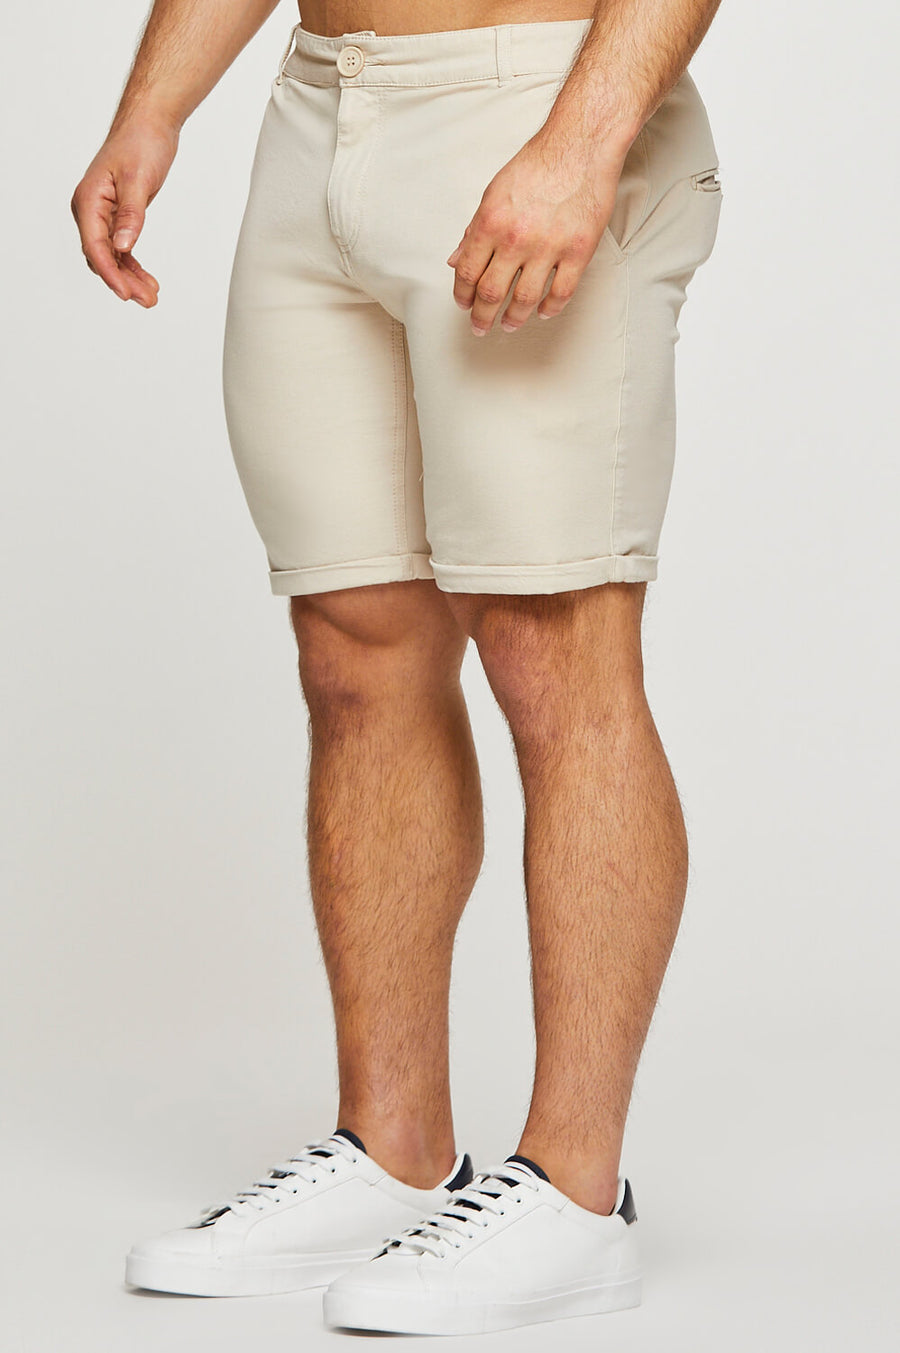 Essential Chino Shorts in Sand - TAILORED ATHLETE - USA